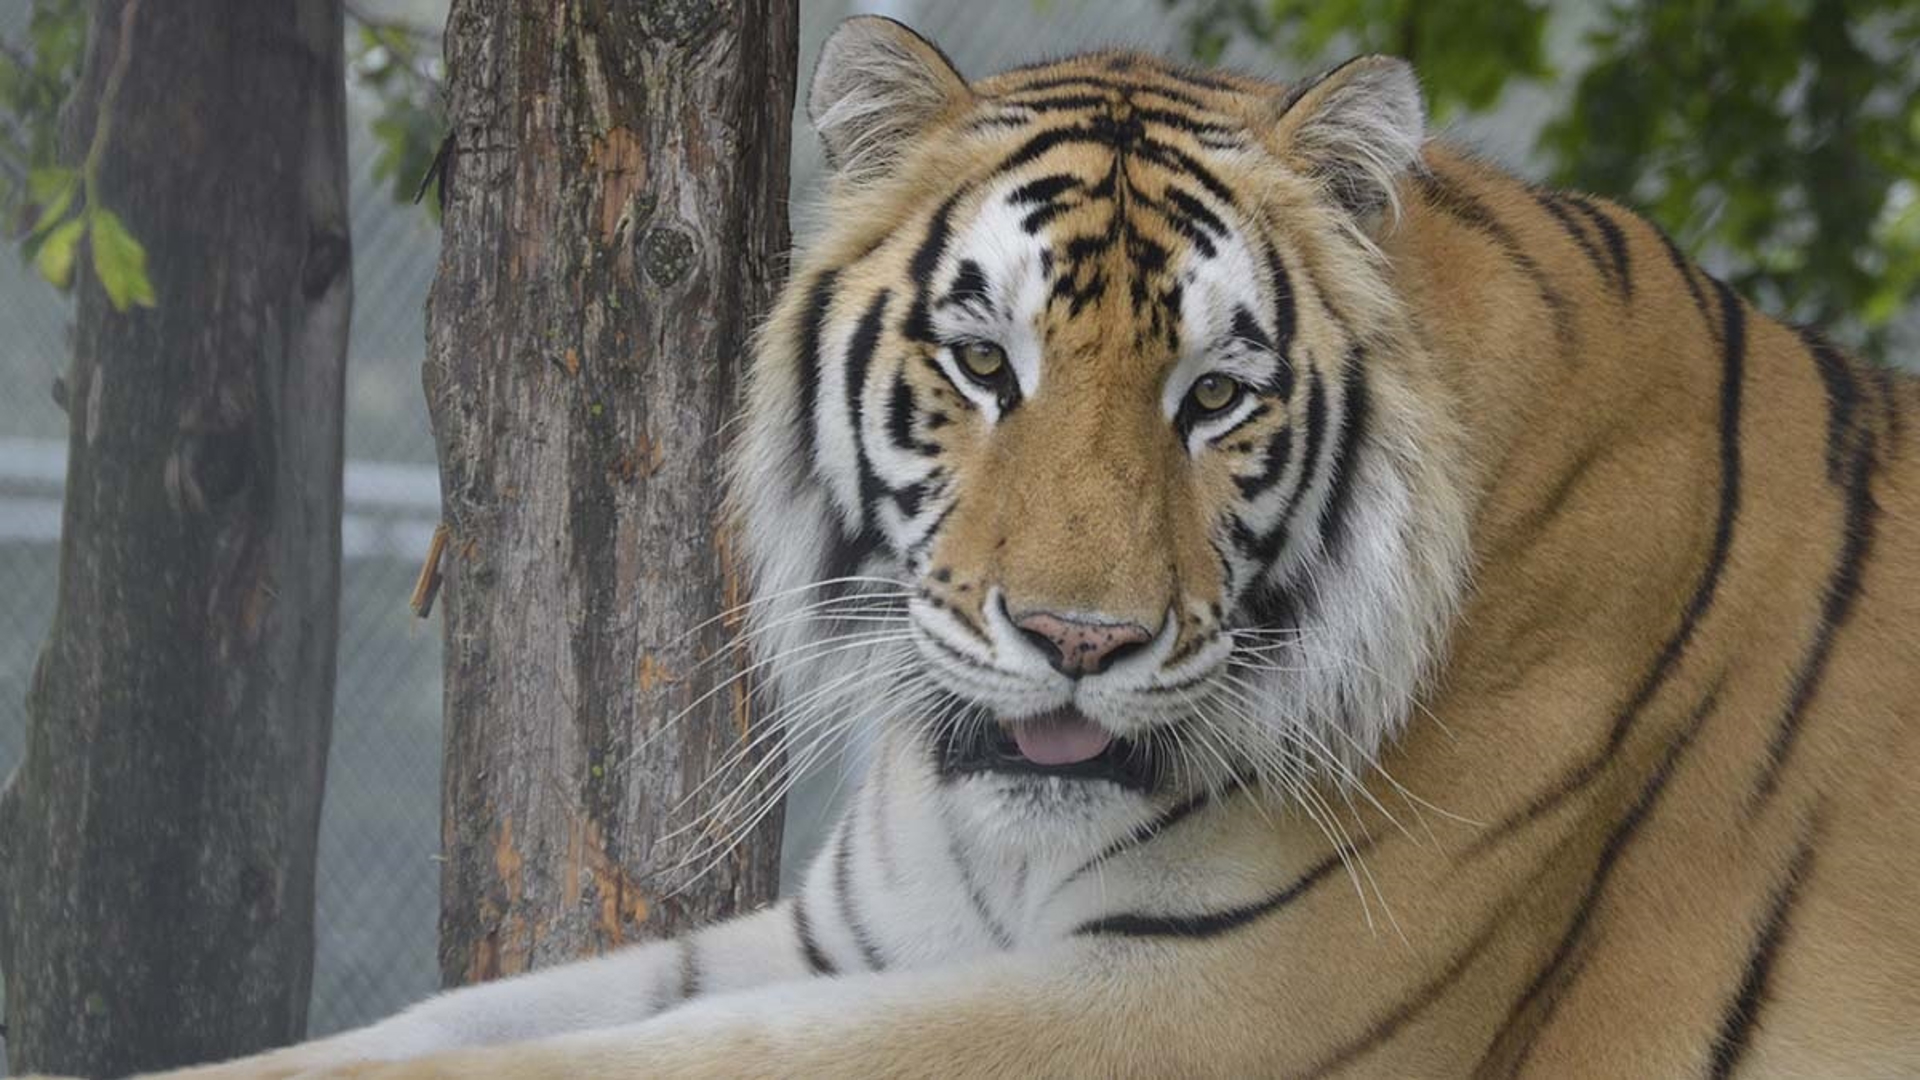 We have an update on a tiger that made national headlines five years ago when some people found him in an abandoned Houston home where they'd gone to smoke weed.